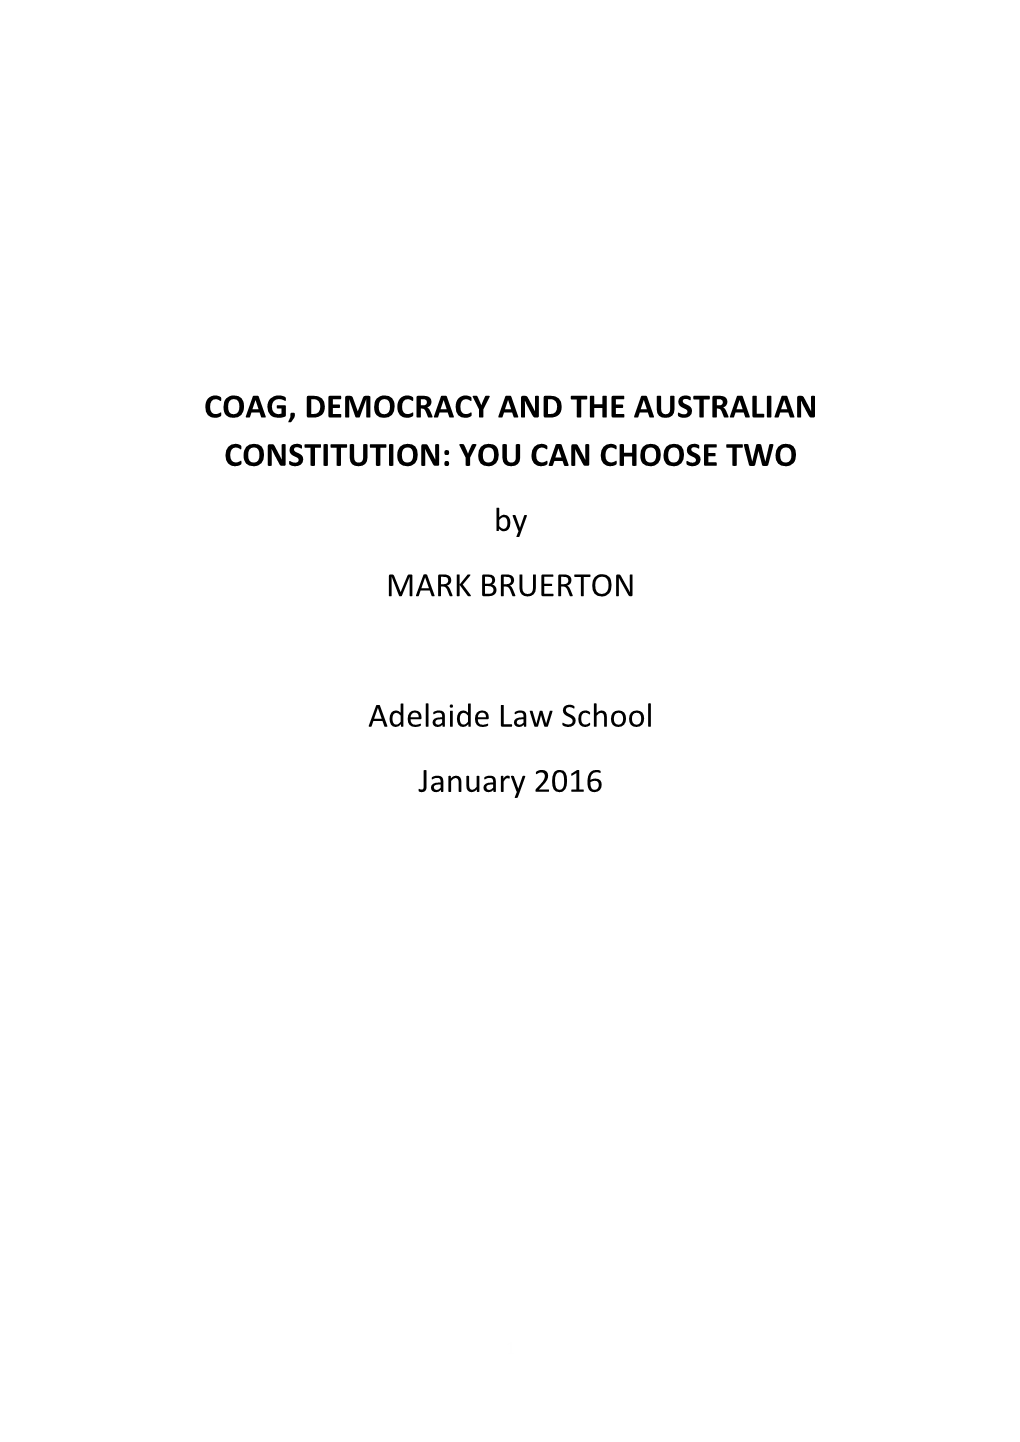 COAG, DEMOCRACY and the AUSTRALIAN CONSTITUTION: YOU CAN CHOOSE TWO by MARK BRUERTON